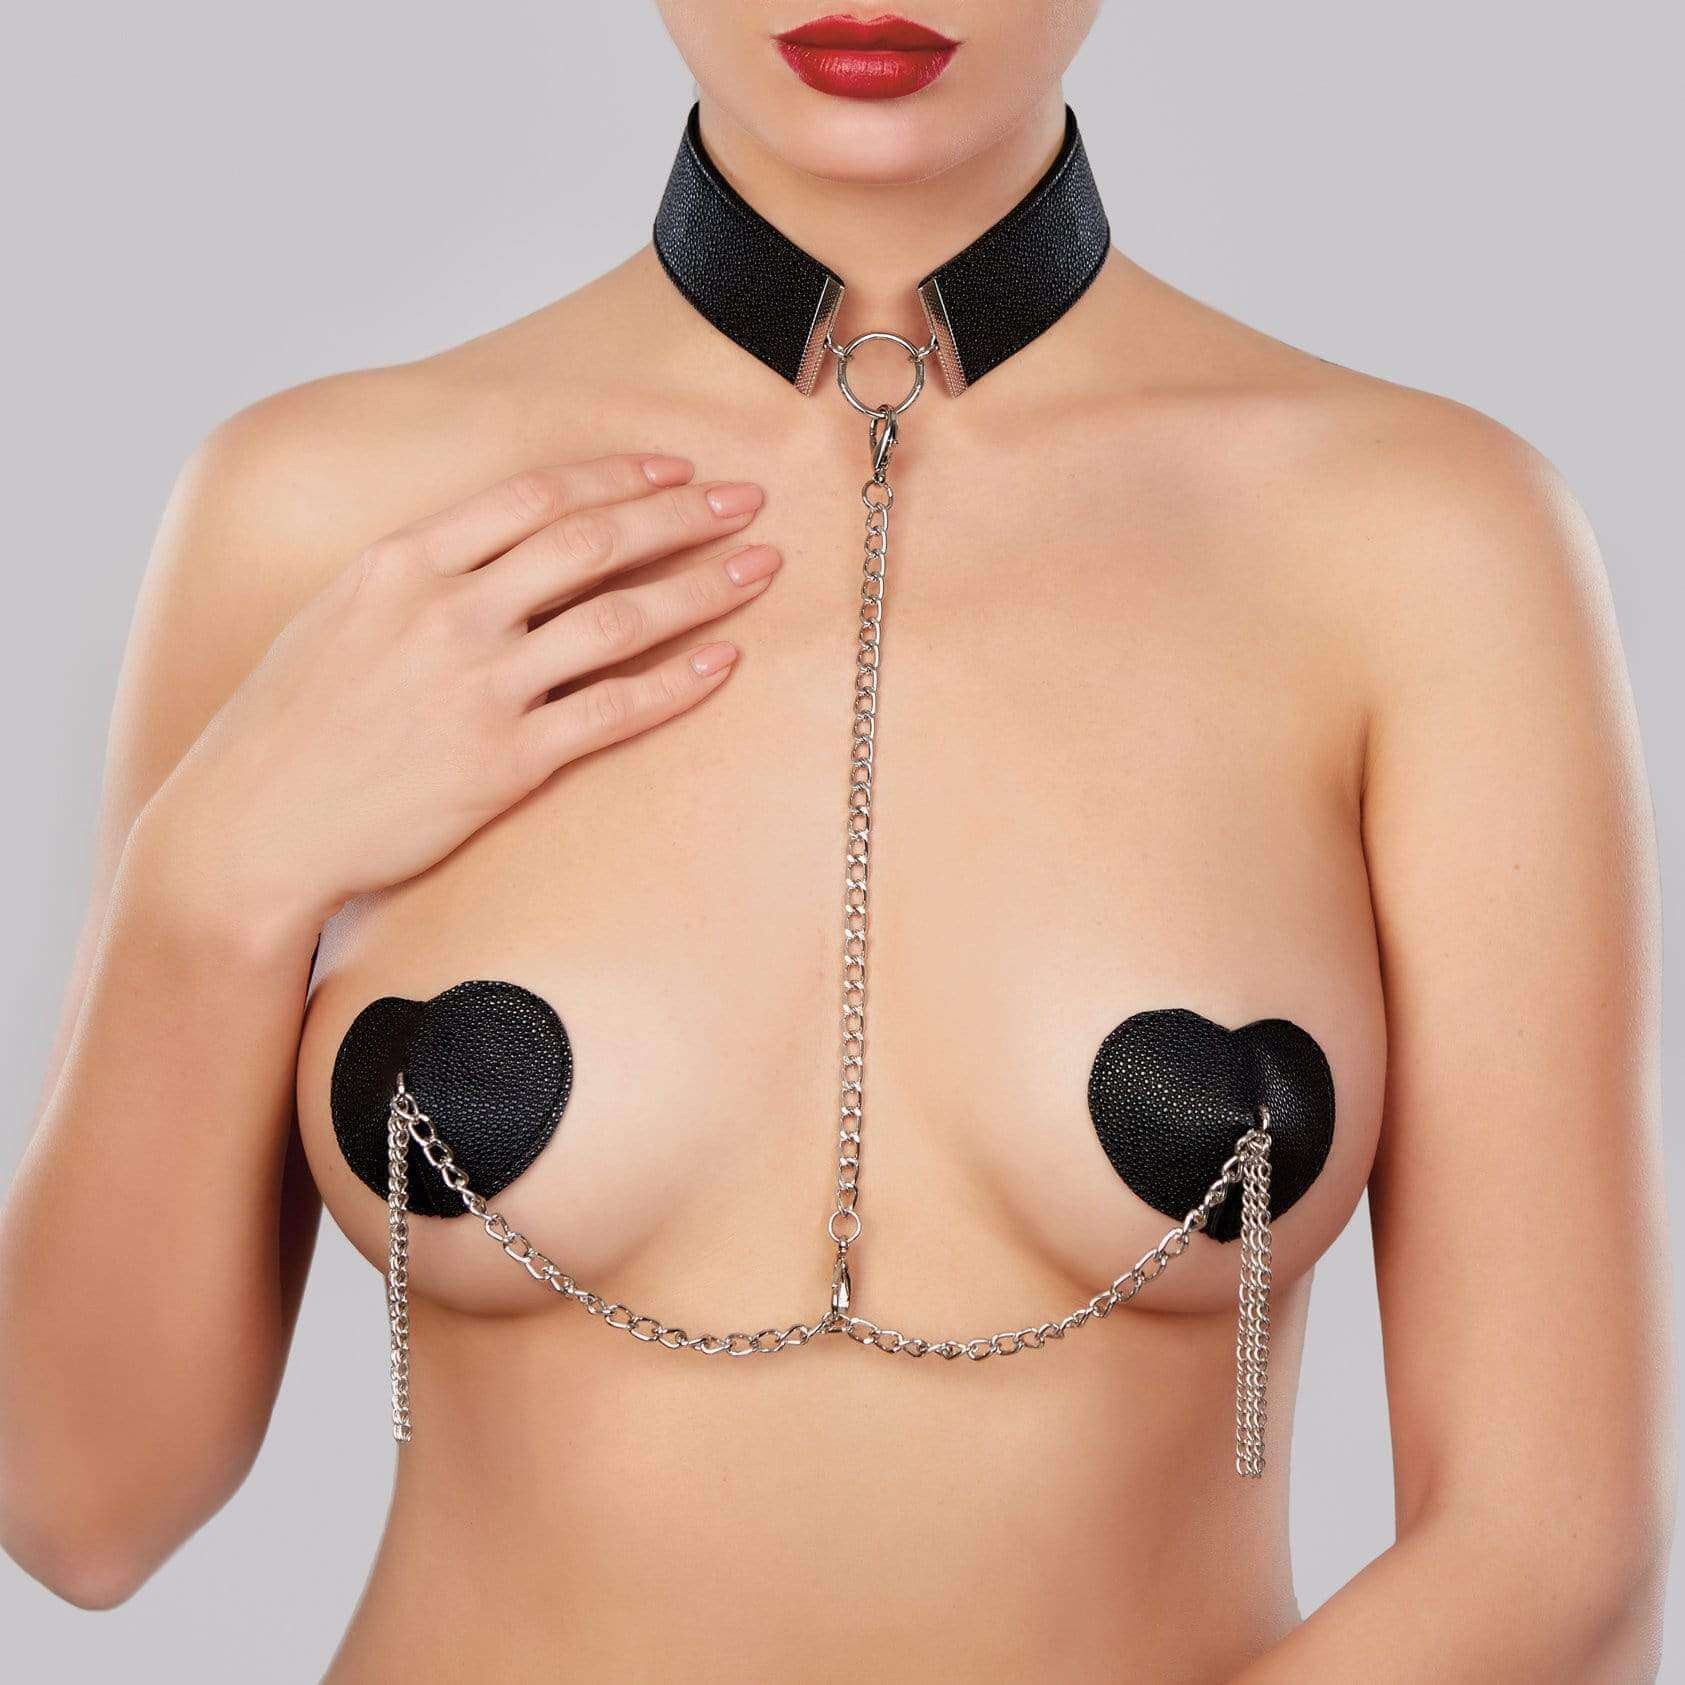 Le Burlesque Collar with Detachable Heart Pasties - Black - Thorn & Feather